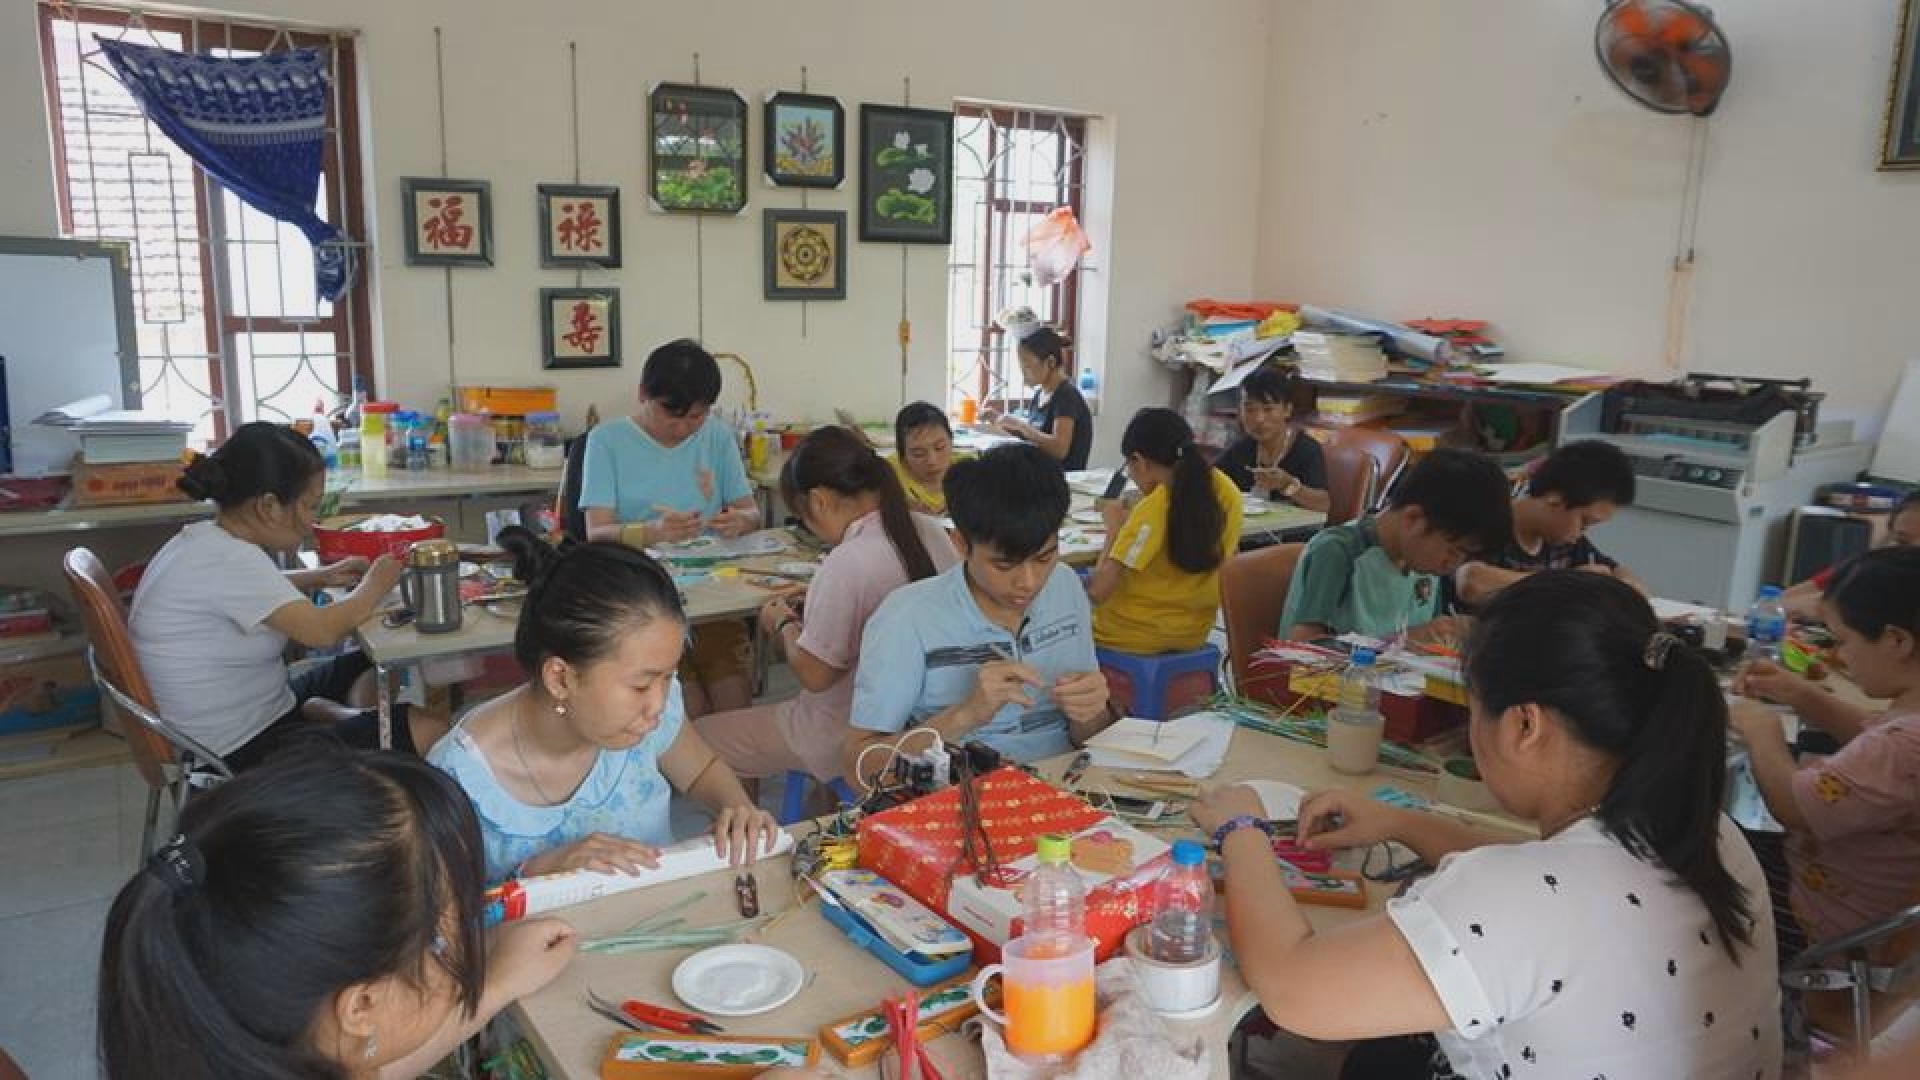 There are over 20 staff working at Thuong Thuong Handmade workshop (Photo: Phuong Vu/VNA)